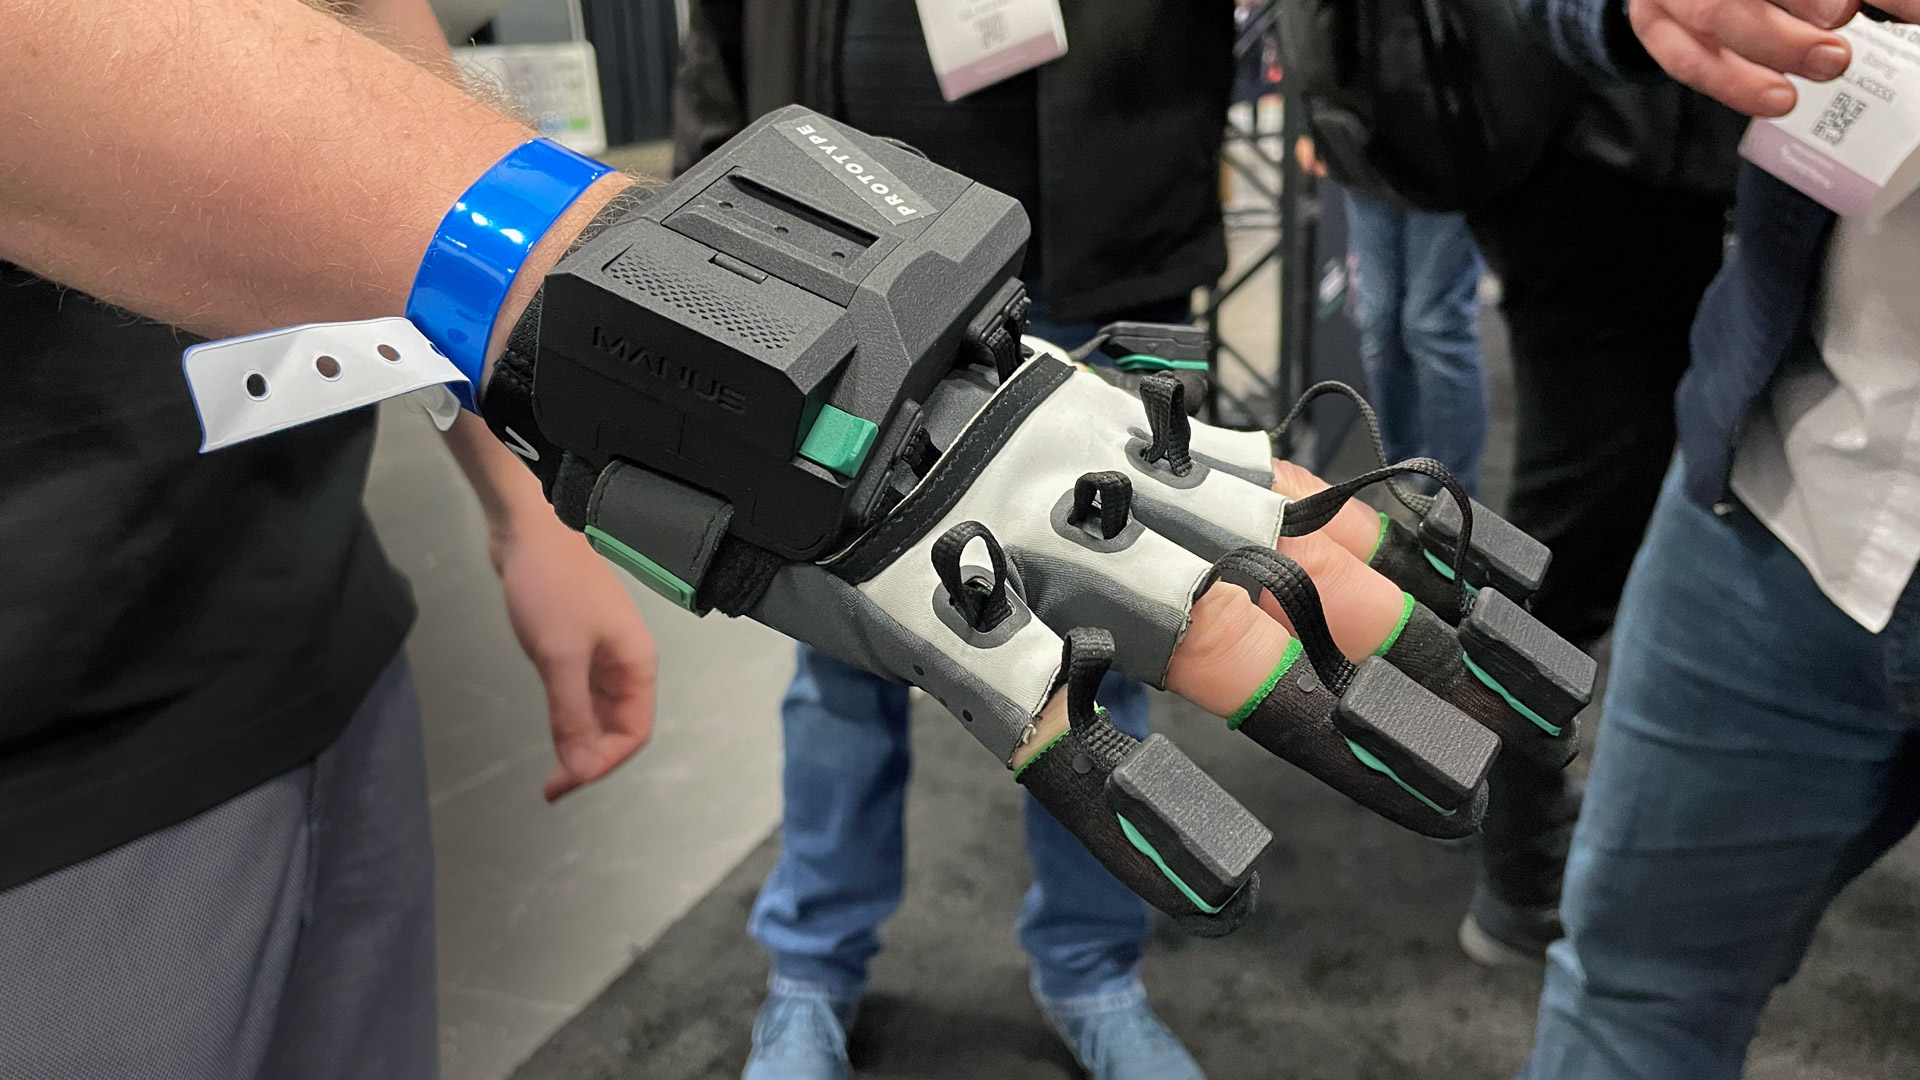 Latest Manus VR Gloves Promise New Levels of Finger Tracking Accuracy